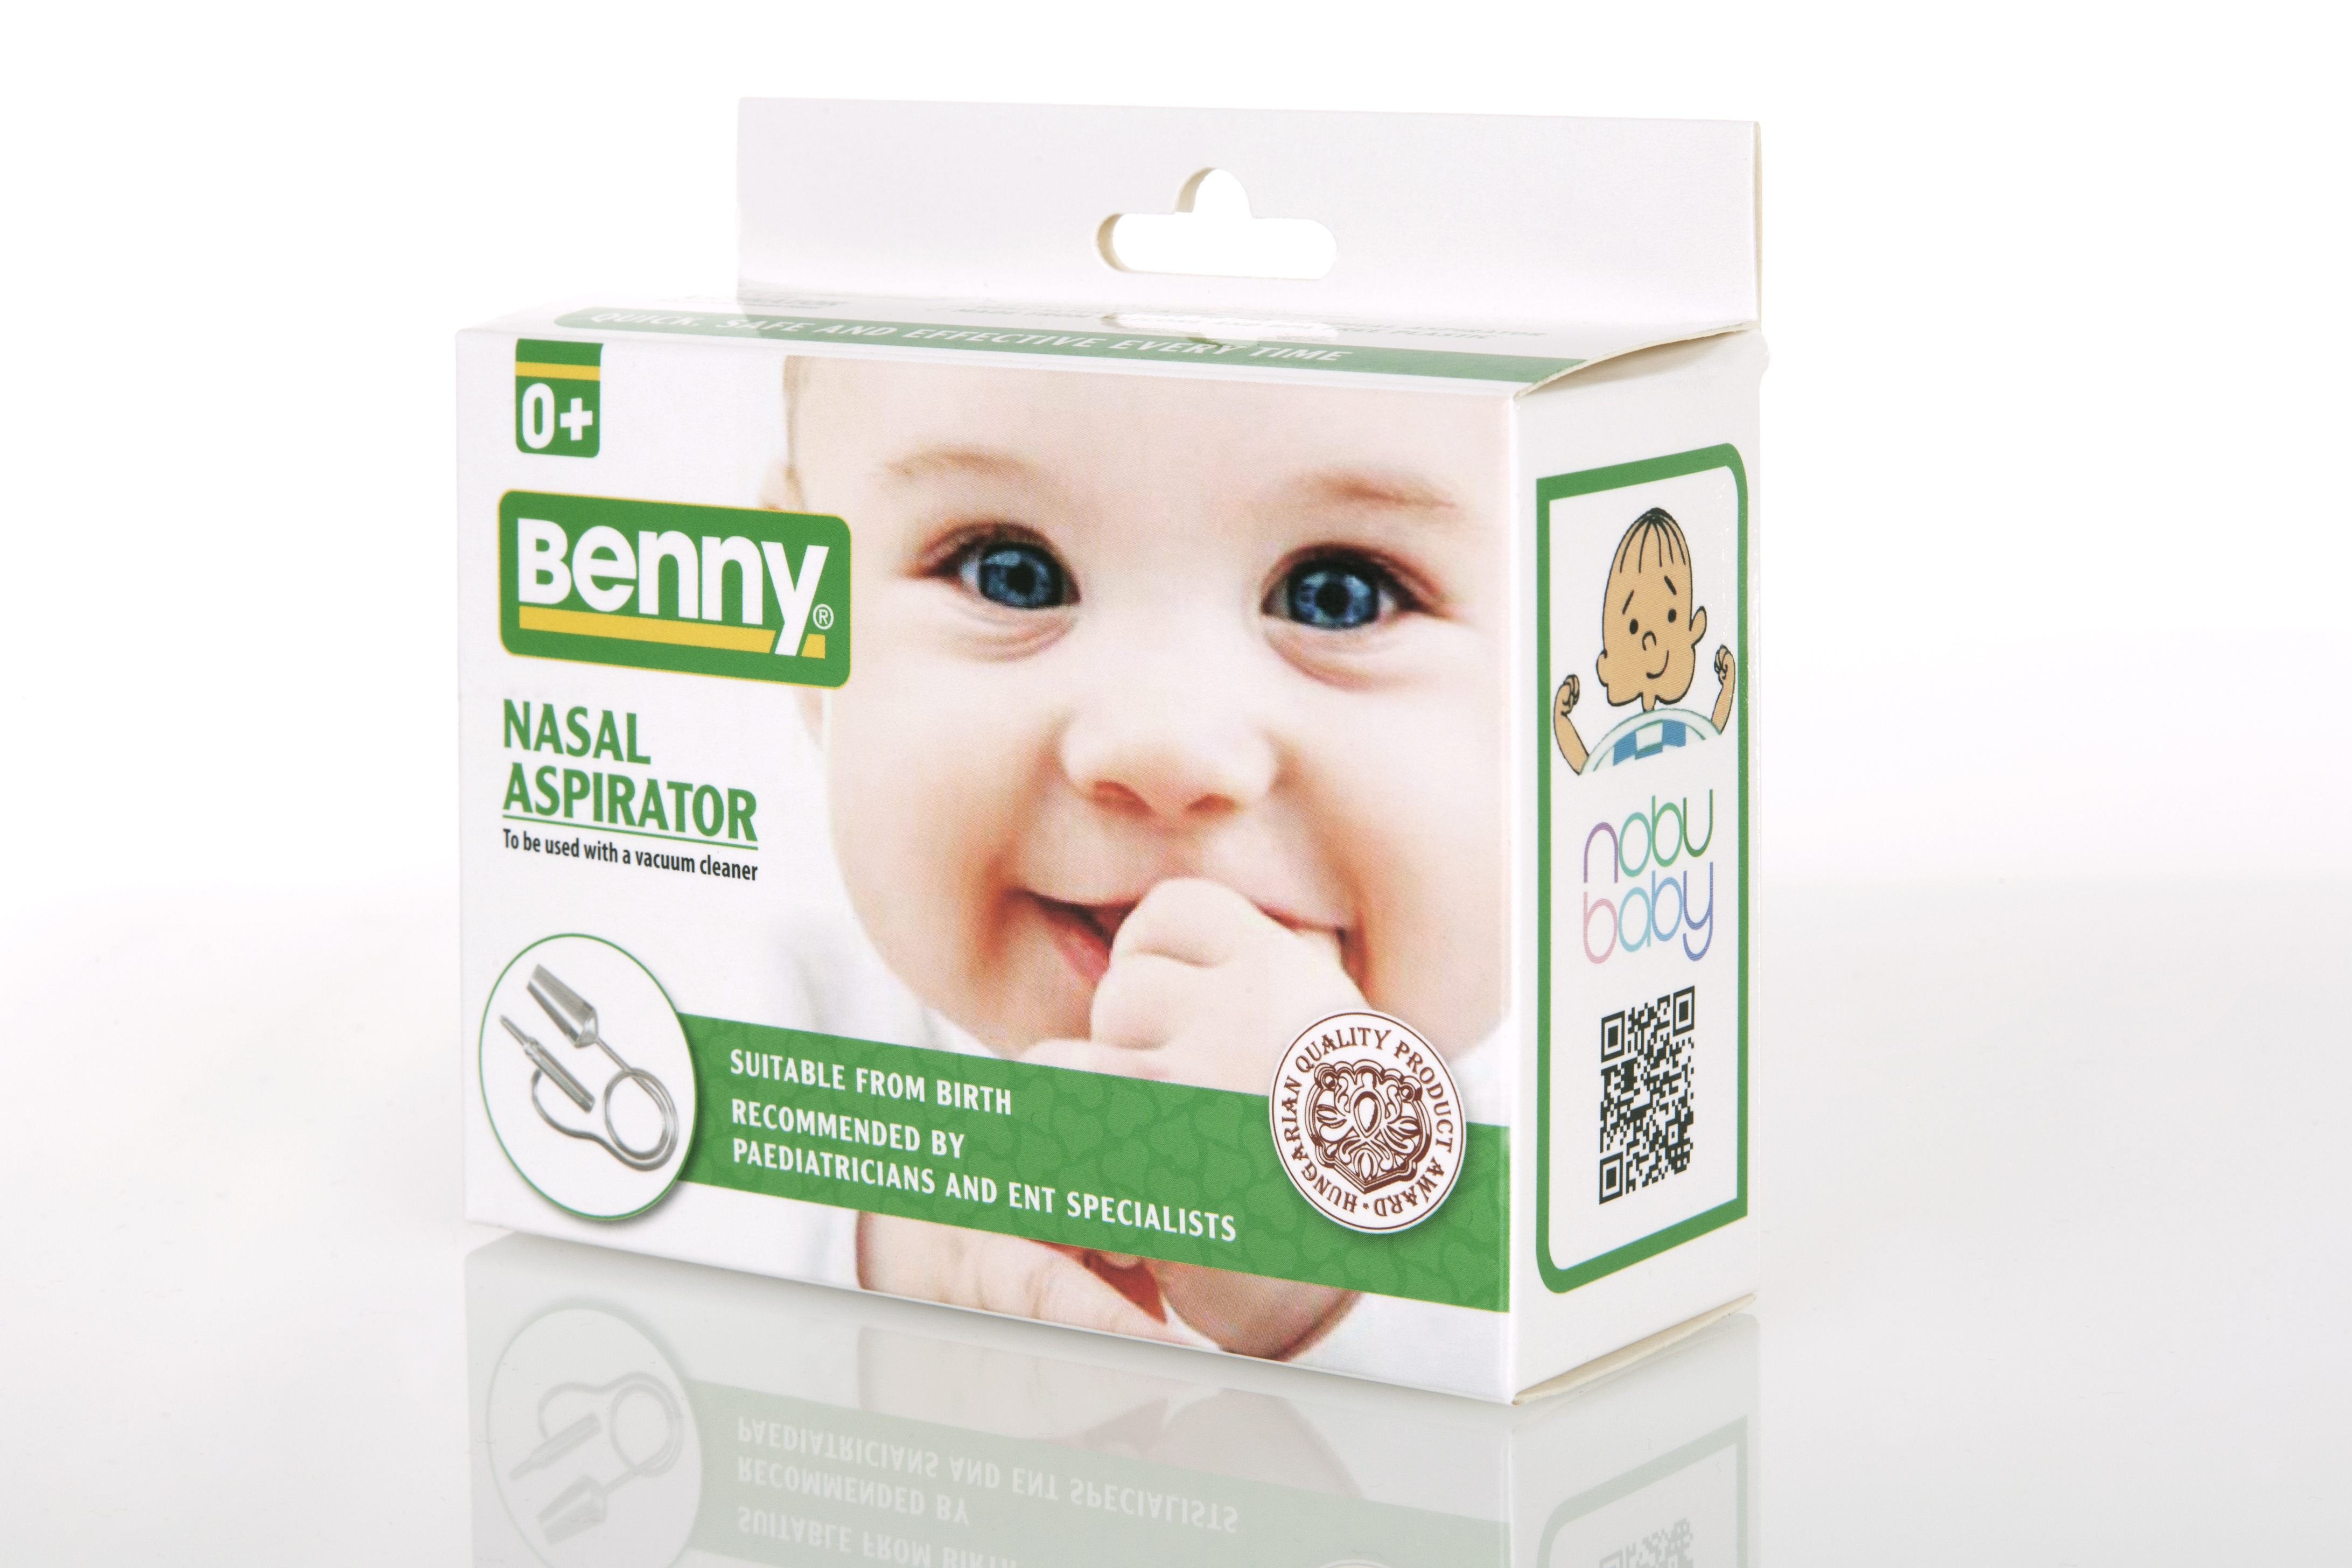 Nobu Baby’s Benny Nasal Aspirator, developed by ENT specialists, is the closest to the hospital-grade aspirators - fast, safe and suitable for babies from birth.

